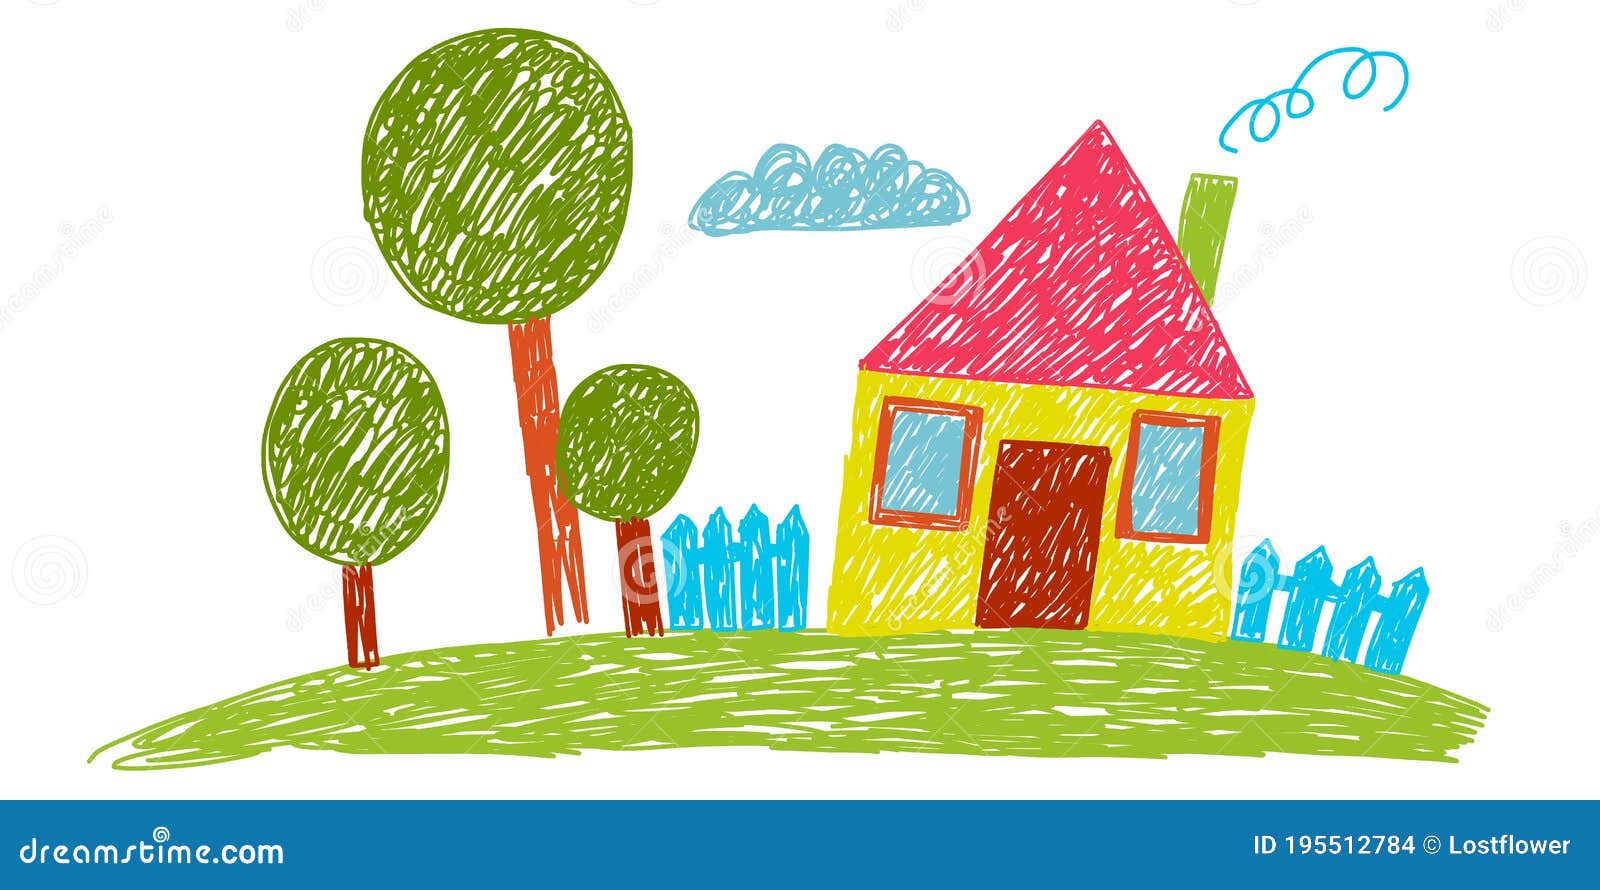 🏠 How to Draw a Little House | Easy Drawing for Kids - Otoons.net